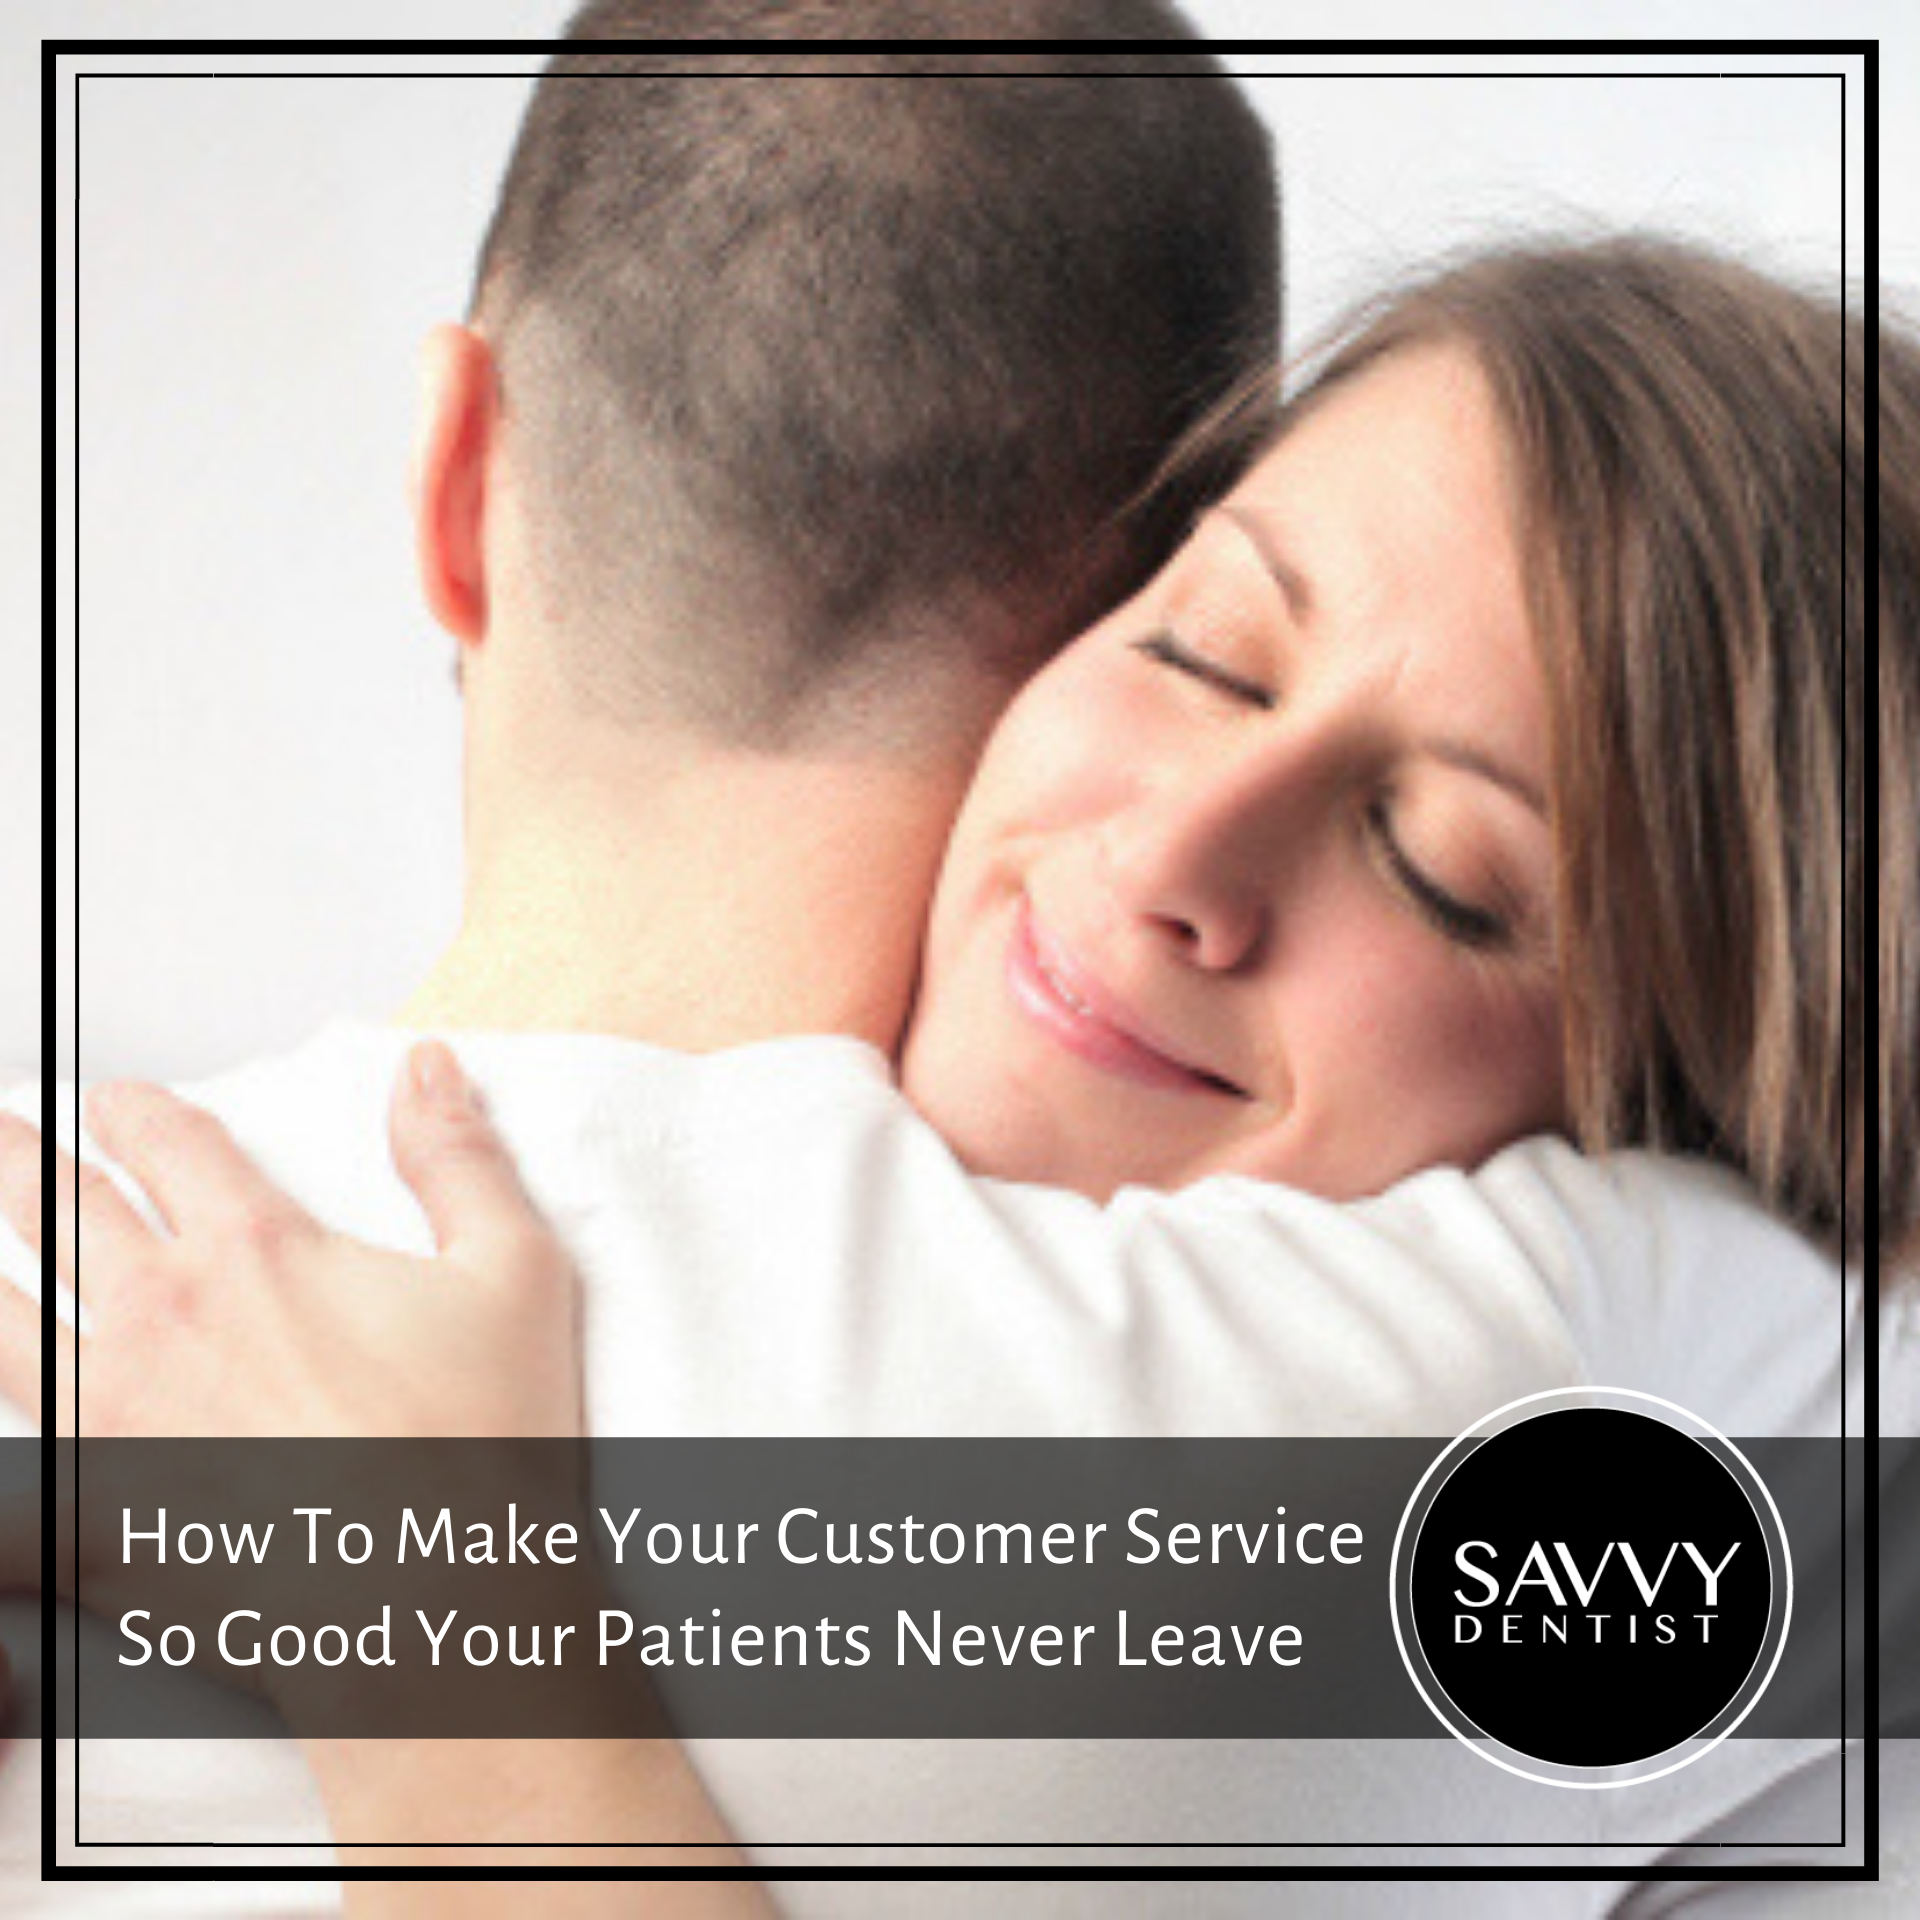 How To Make Your Customer Service So Good Your Patients Never Leave